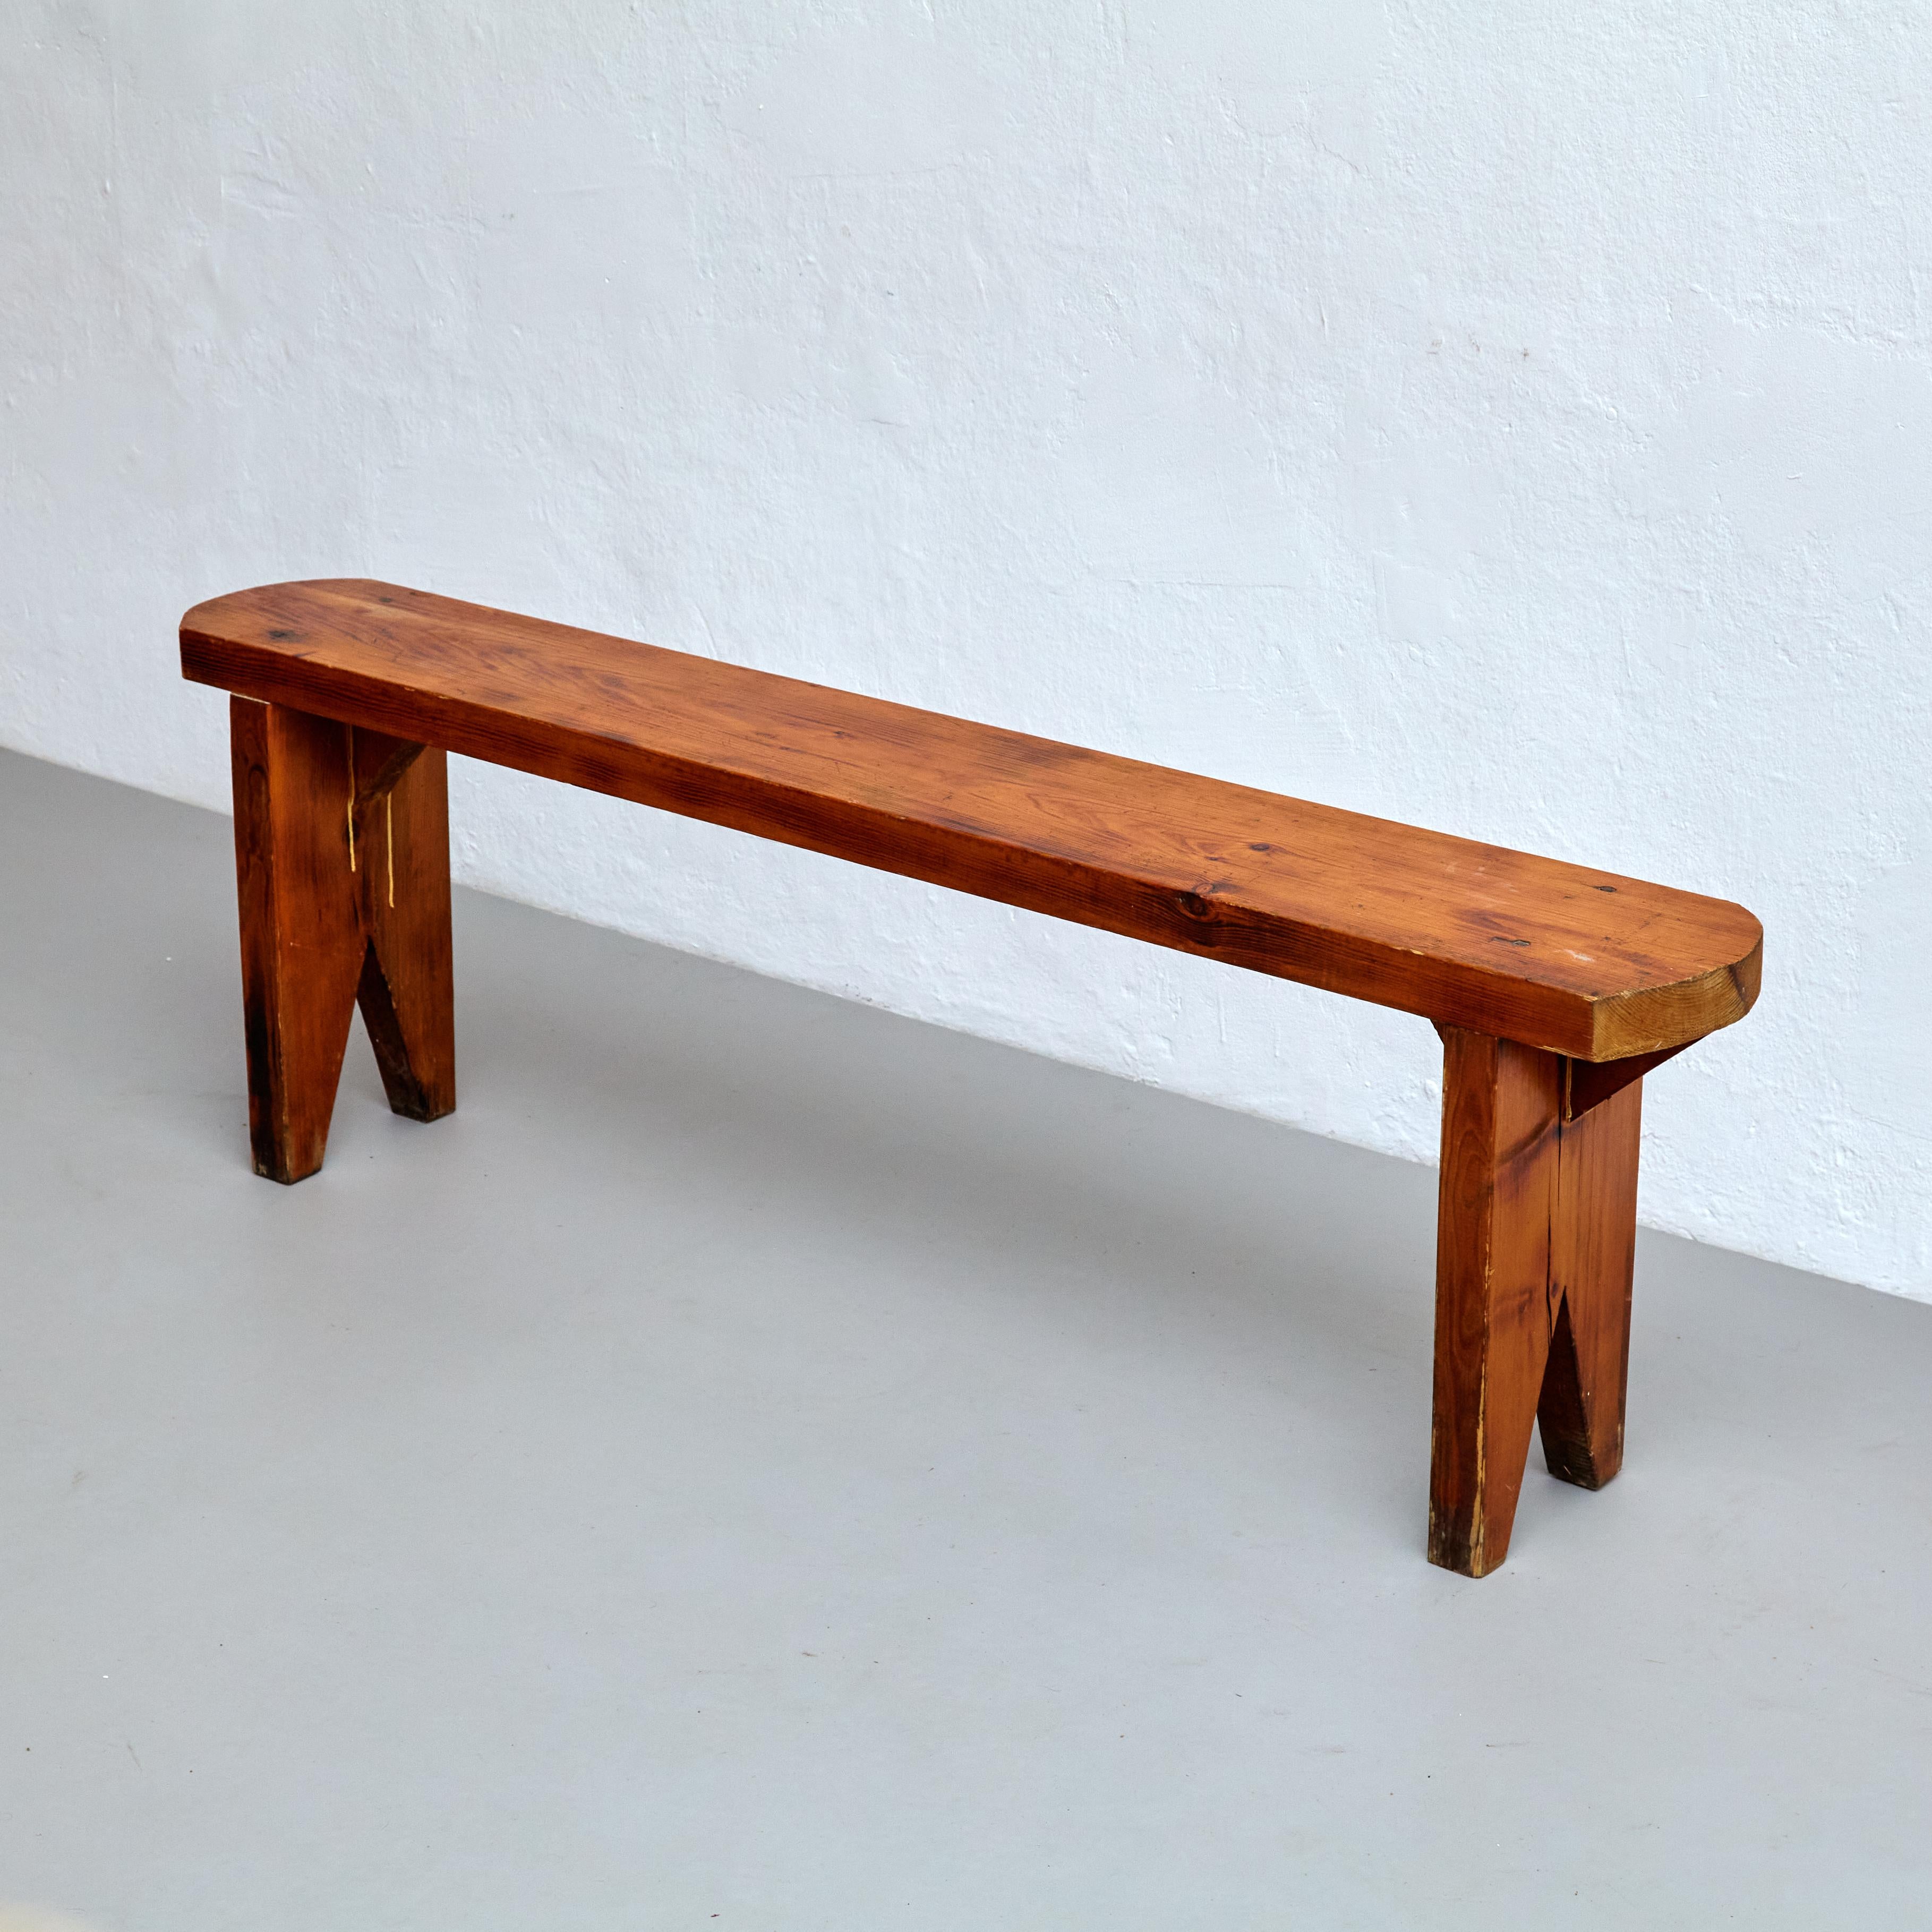 Mid Century Modern Rationalist Wood Bench.

Manufactured in France, circa 1960.

In original condition with minor wear consistent of age and use, preserving a beautiful patina.

Materials: 
Wood

Dimensions: 
D 22cm x W 145cm x H 49cm (SH 49